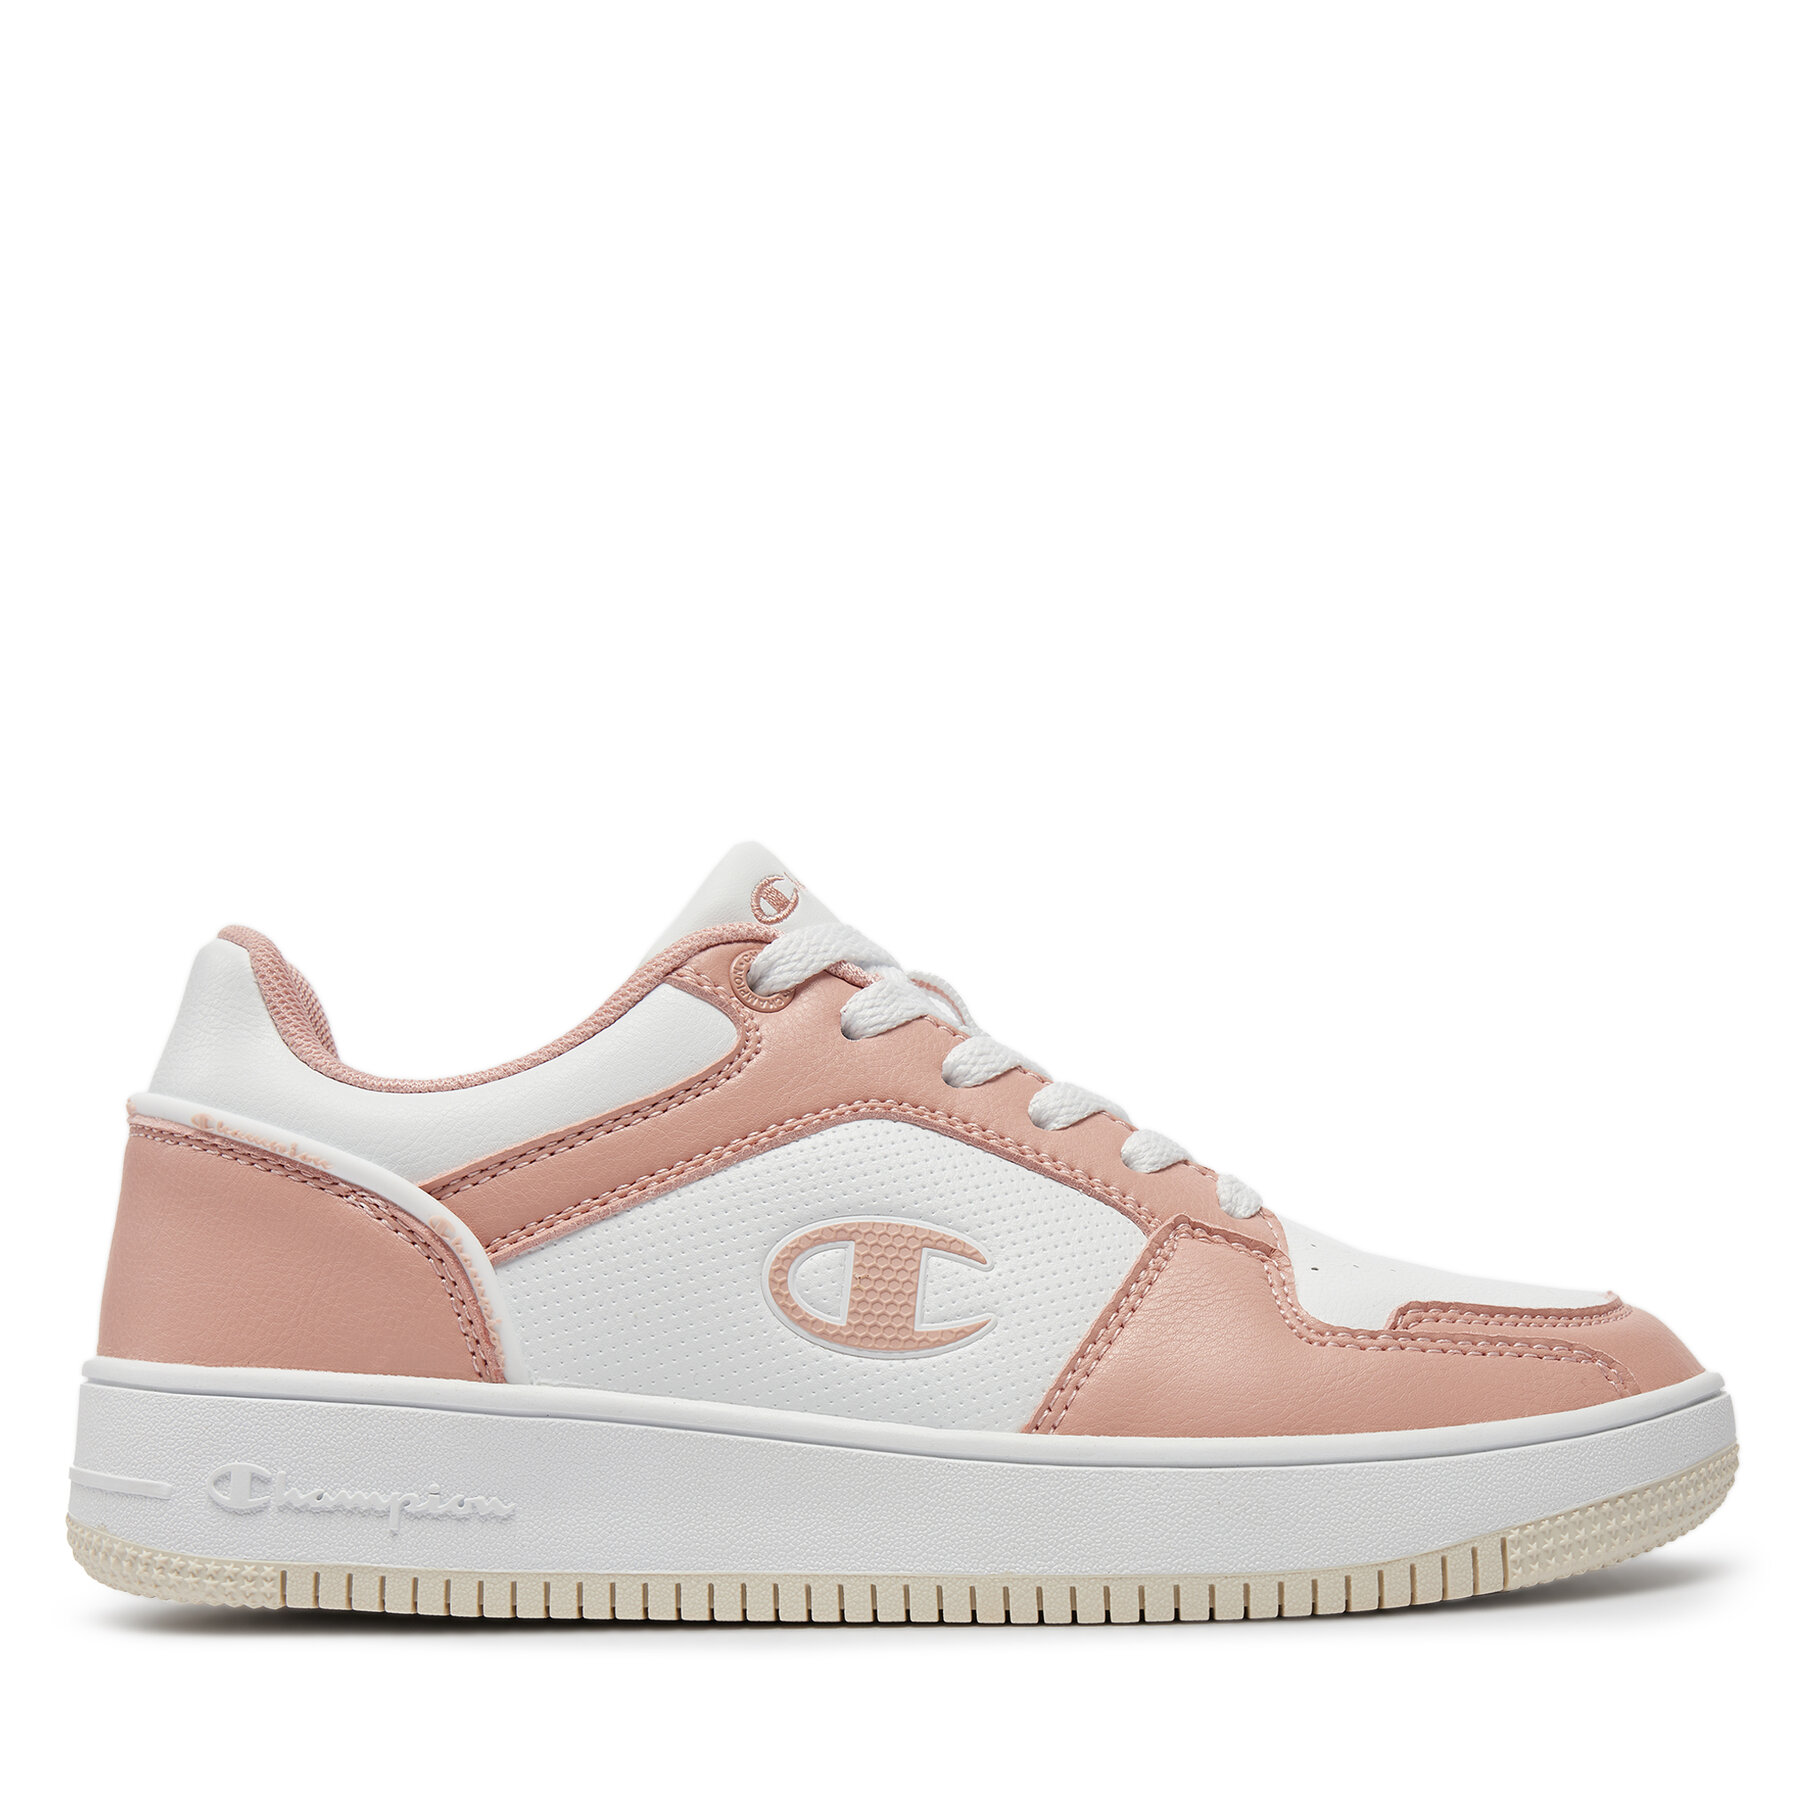 Sneakers Champion Rebound 2.0 Low Low Cut Shoe S11470-CHA-PS020 Pink/Ofw von Champion